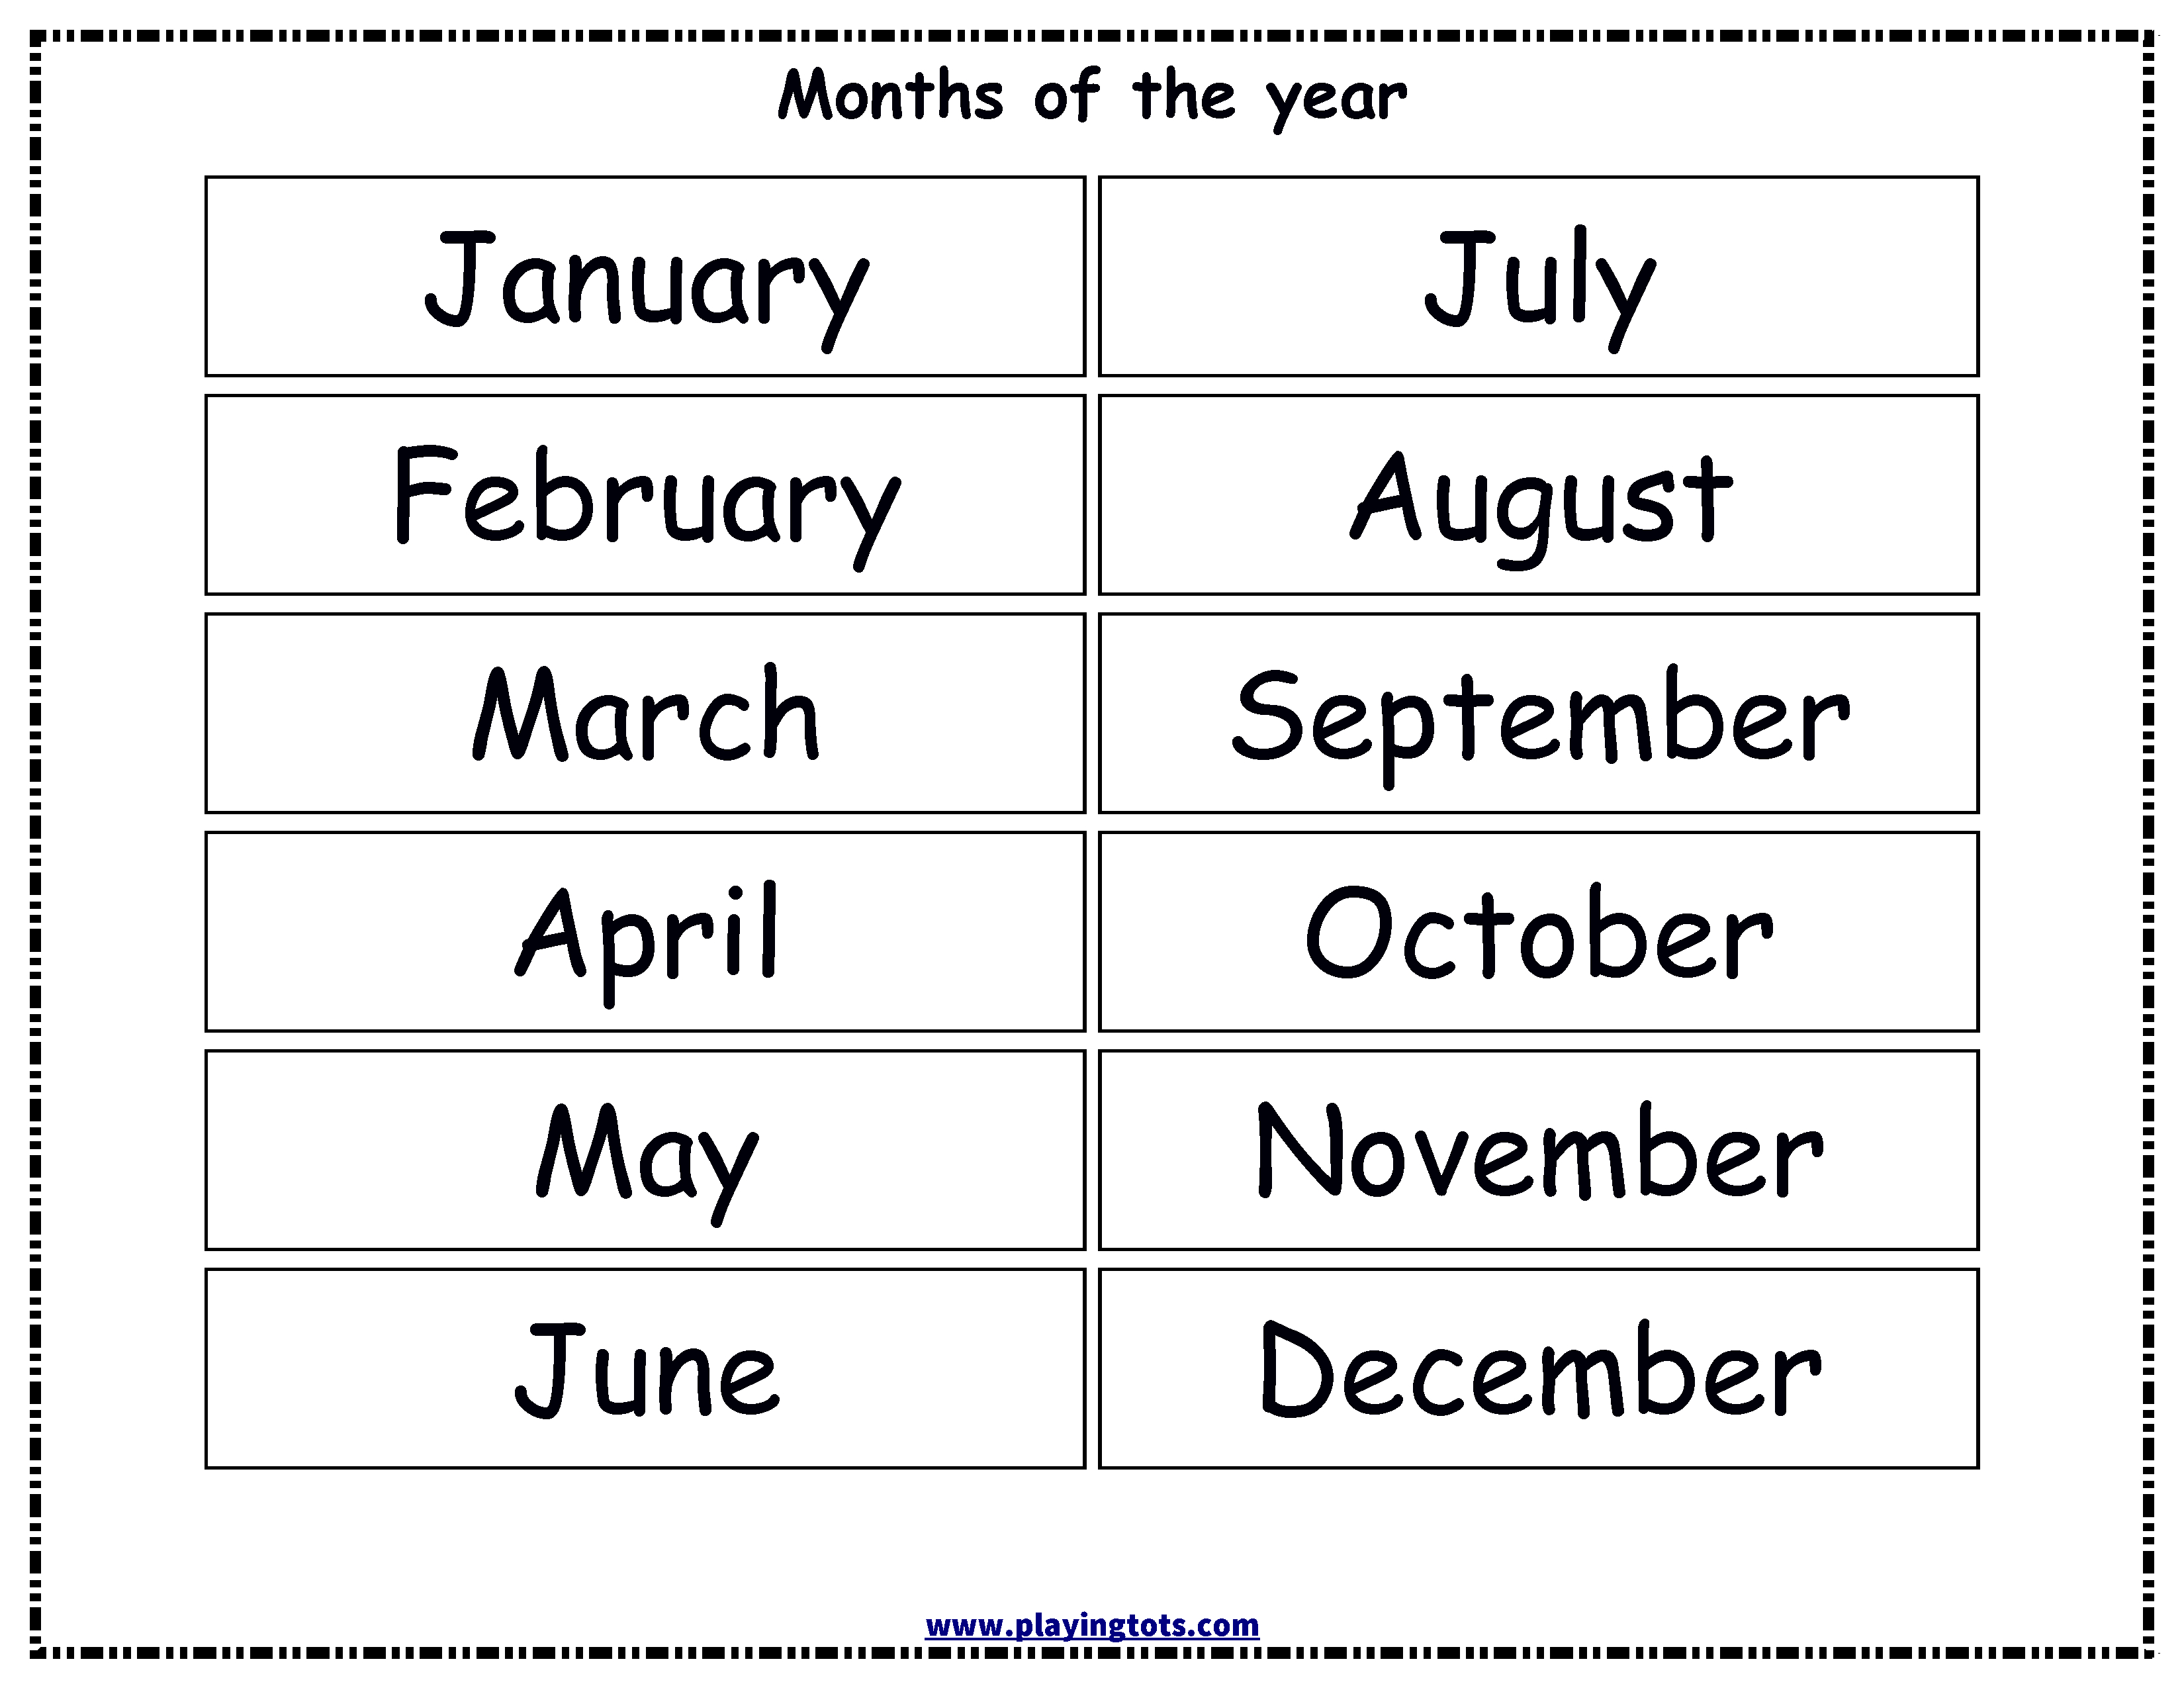 Free Printable Months Of The Year Chart | Alivia Learning Folder - Months Of The Year Printables Free